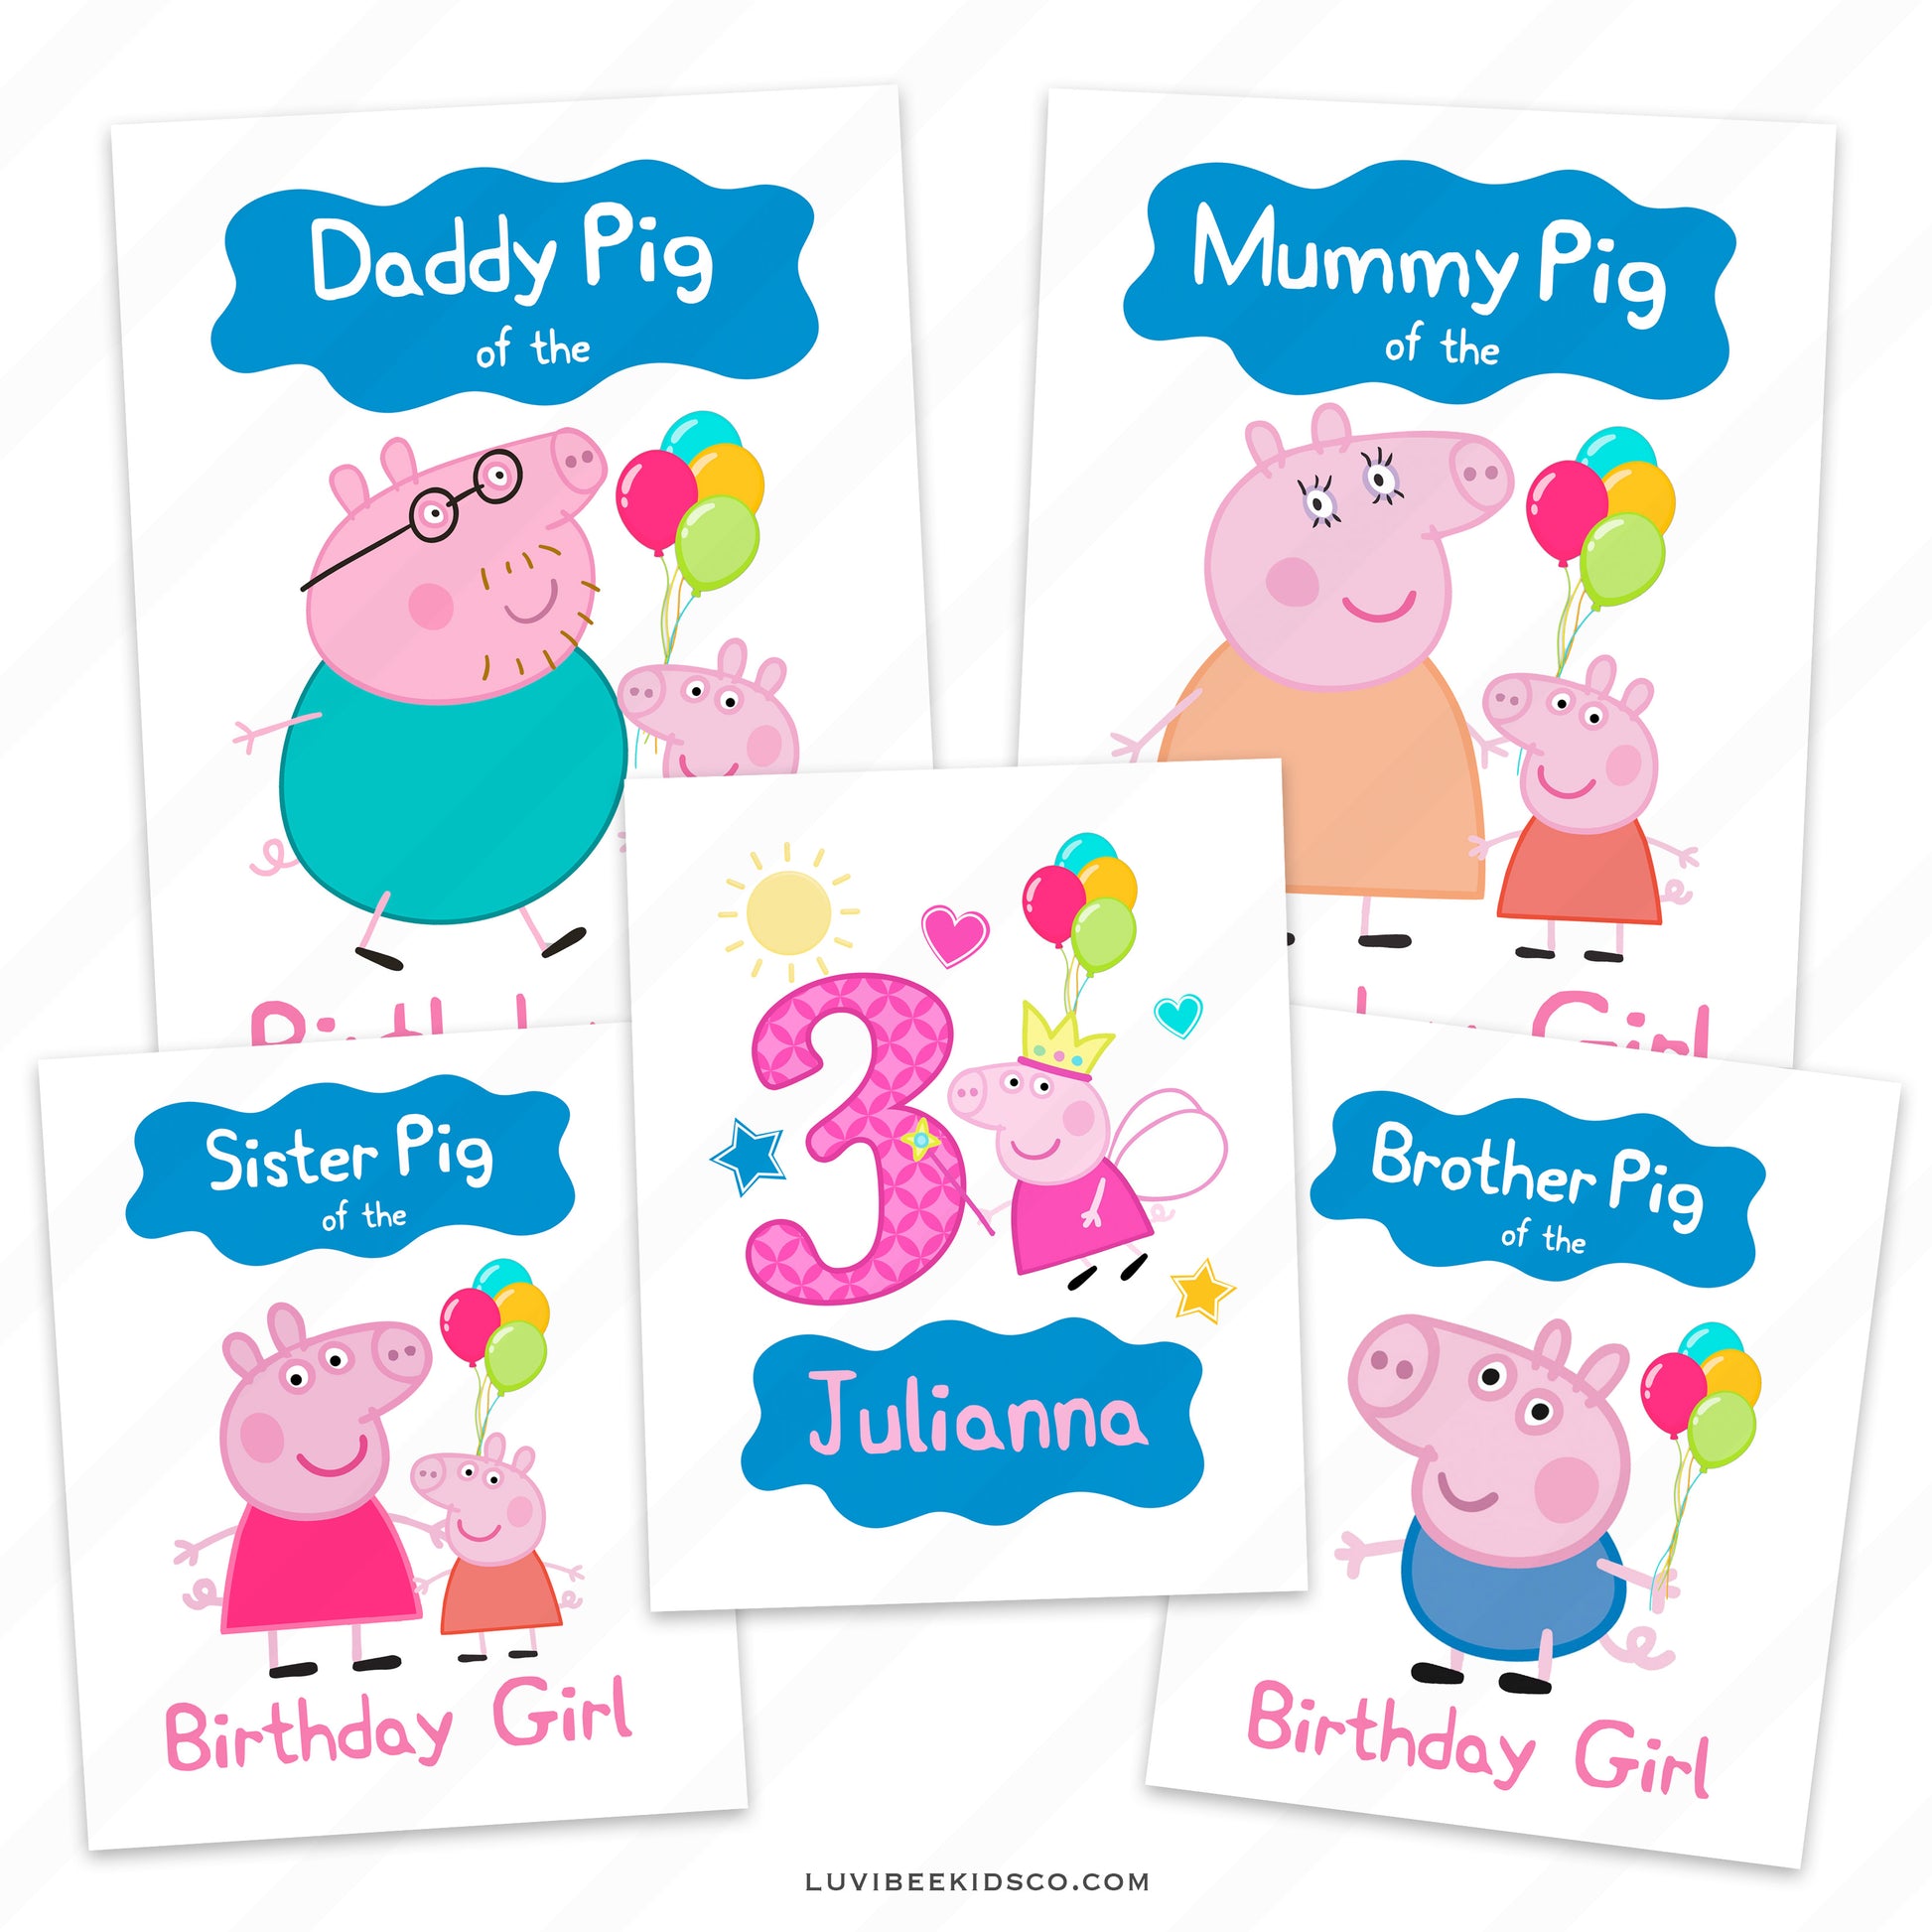 Peppa Pig Iron On Transfers Family Pack | Names and Characters can be Changed - LuvibeeKidsCo